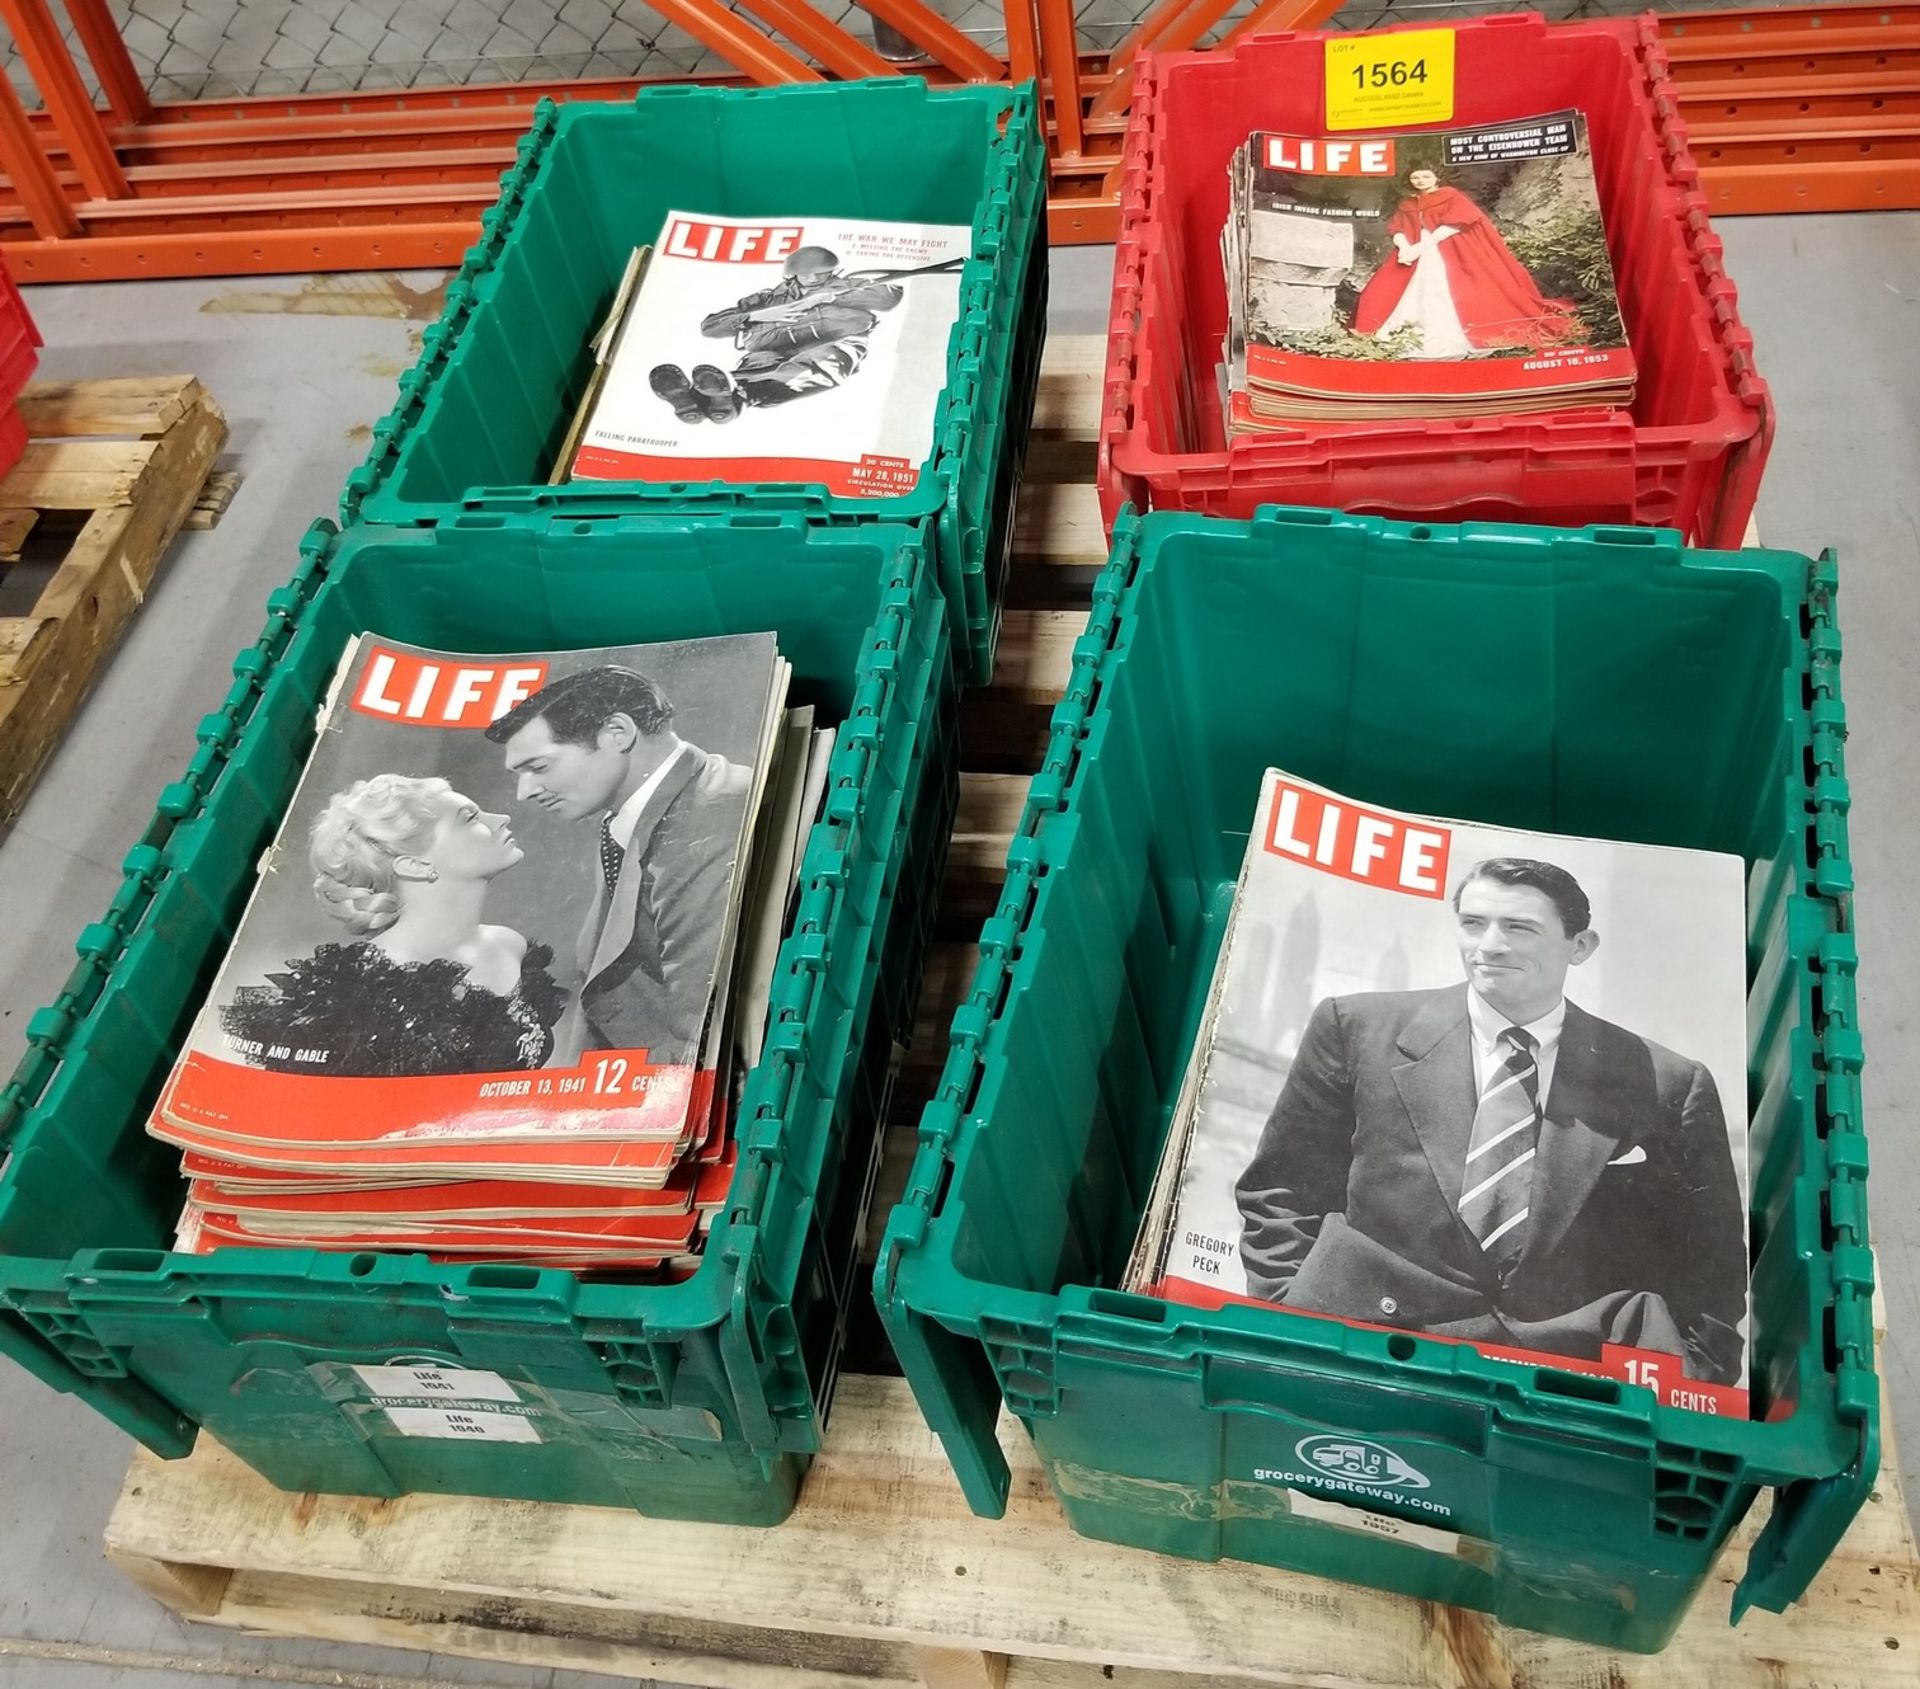 VINTAGE TIME MAGAZINES - APPROX 180 ISSUES - YEARS INDICATED IN PHOTOS - 1940, 1941, 1953, 1957